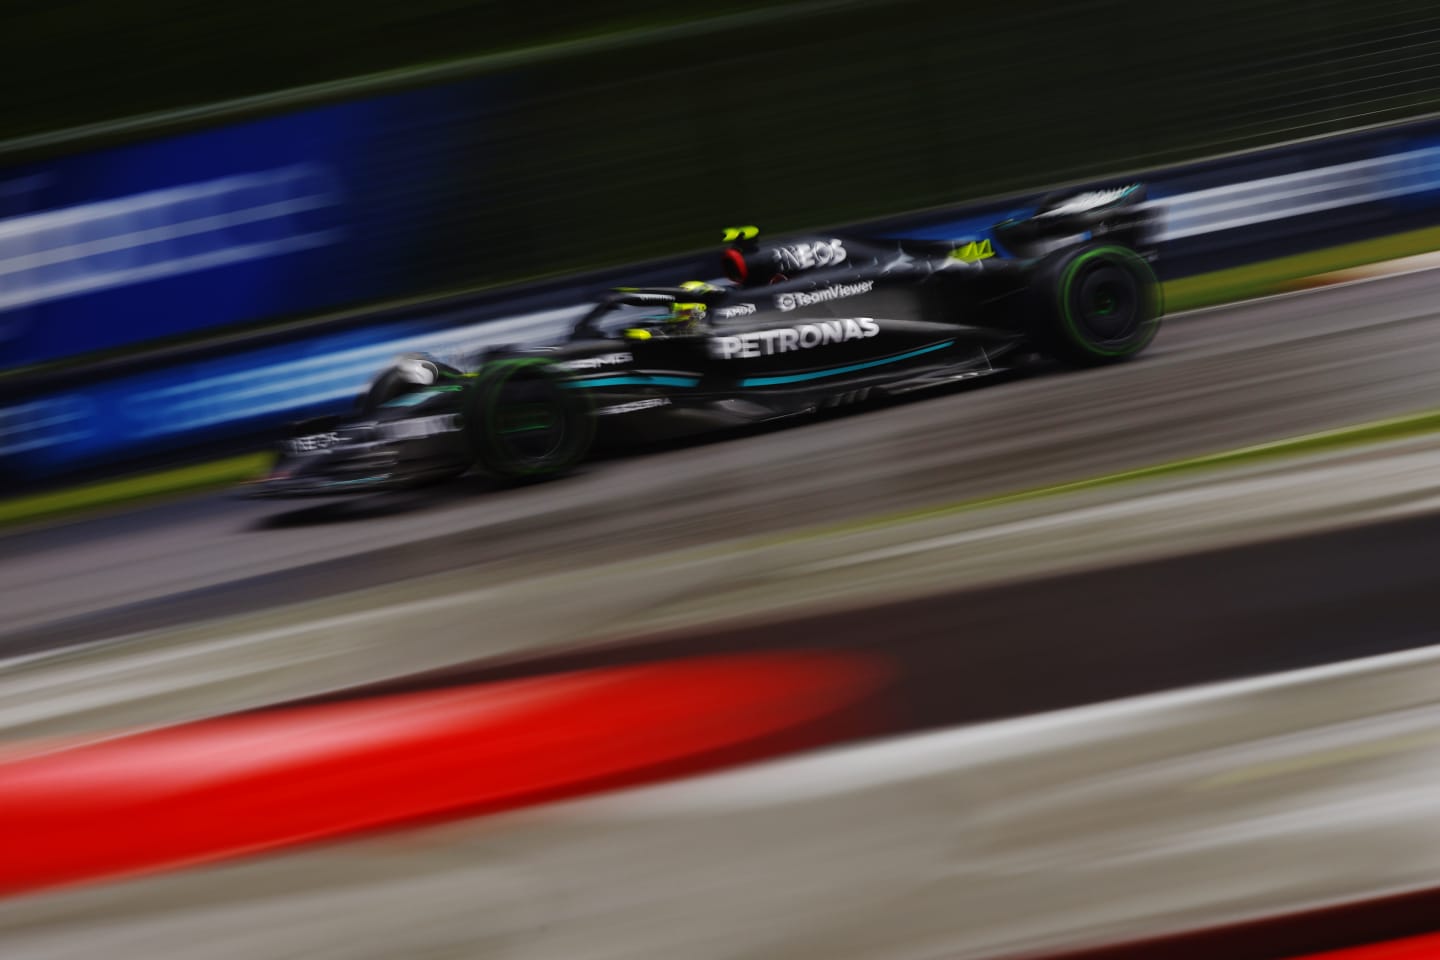 MONTREAL, QUEBEC - JUNE 17: Lewis Hamilton of Great Britain driving the (44) Mercedes AMG Petronas F1 Team W14 on track during final practice ahead of the F1 Grand Prix of Canada at Circuit Gilles Villeneuve on June 17, 2023 in Montreal, Quebec. (Photo by Jared C. Tilton/Getty Images)